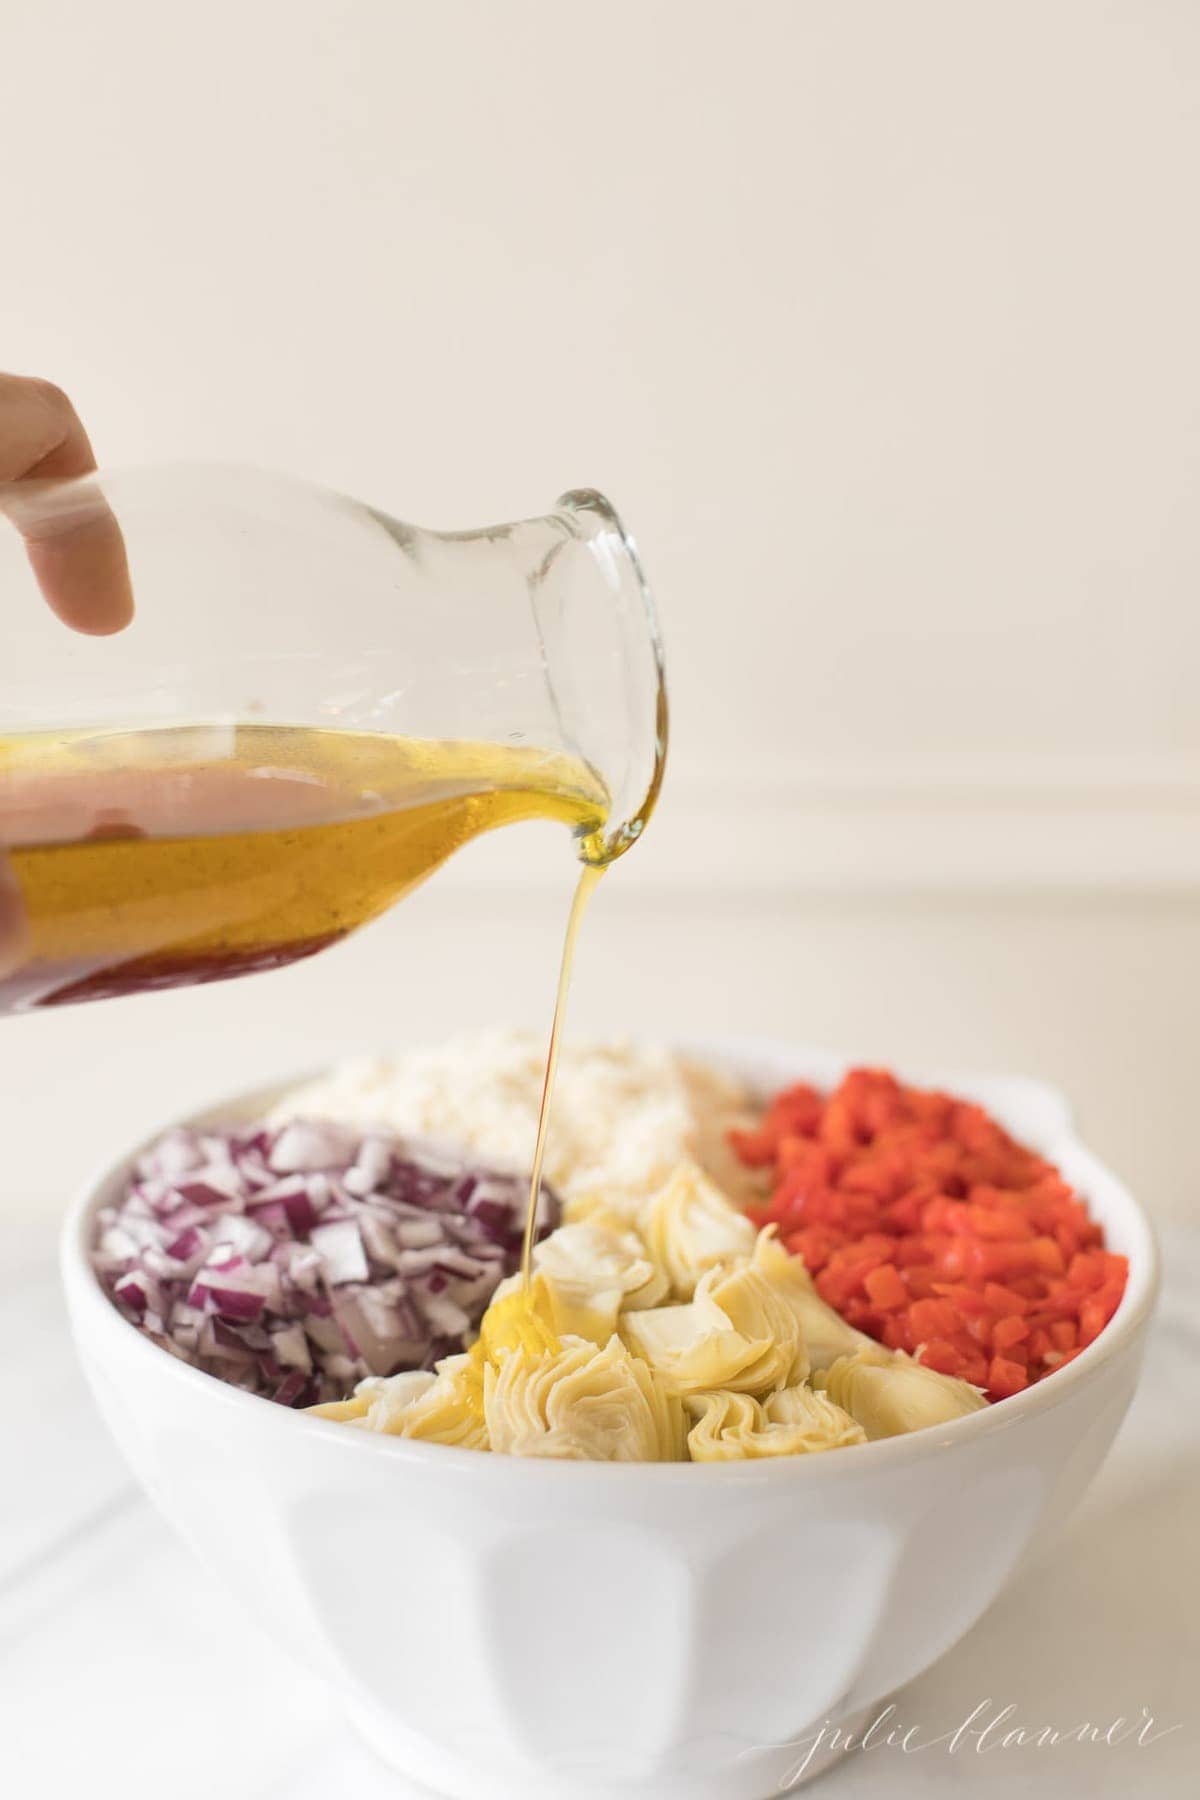 Italian pasta salad dressing being poured over the salad ingredients